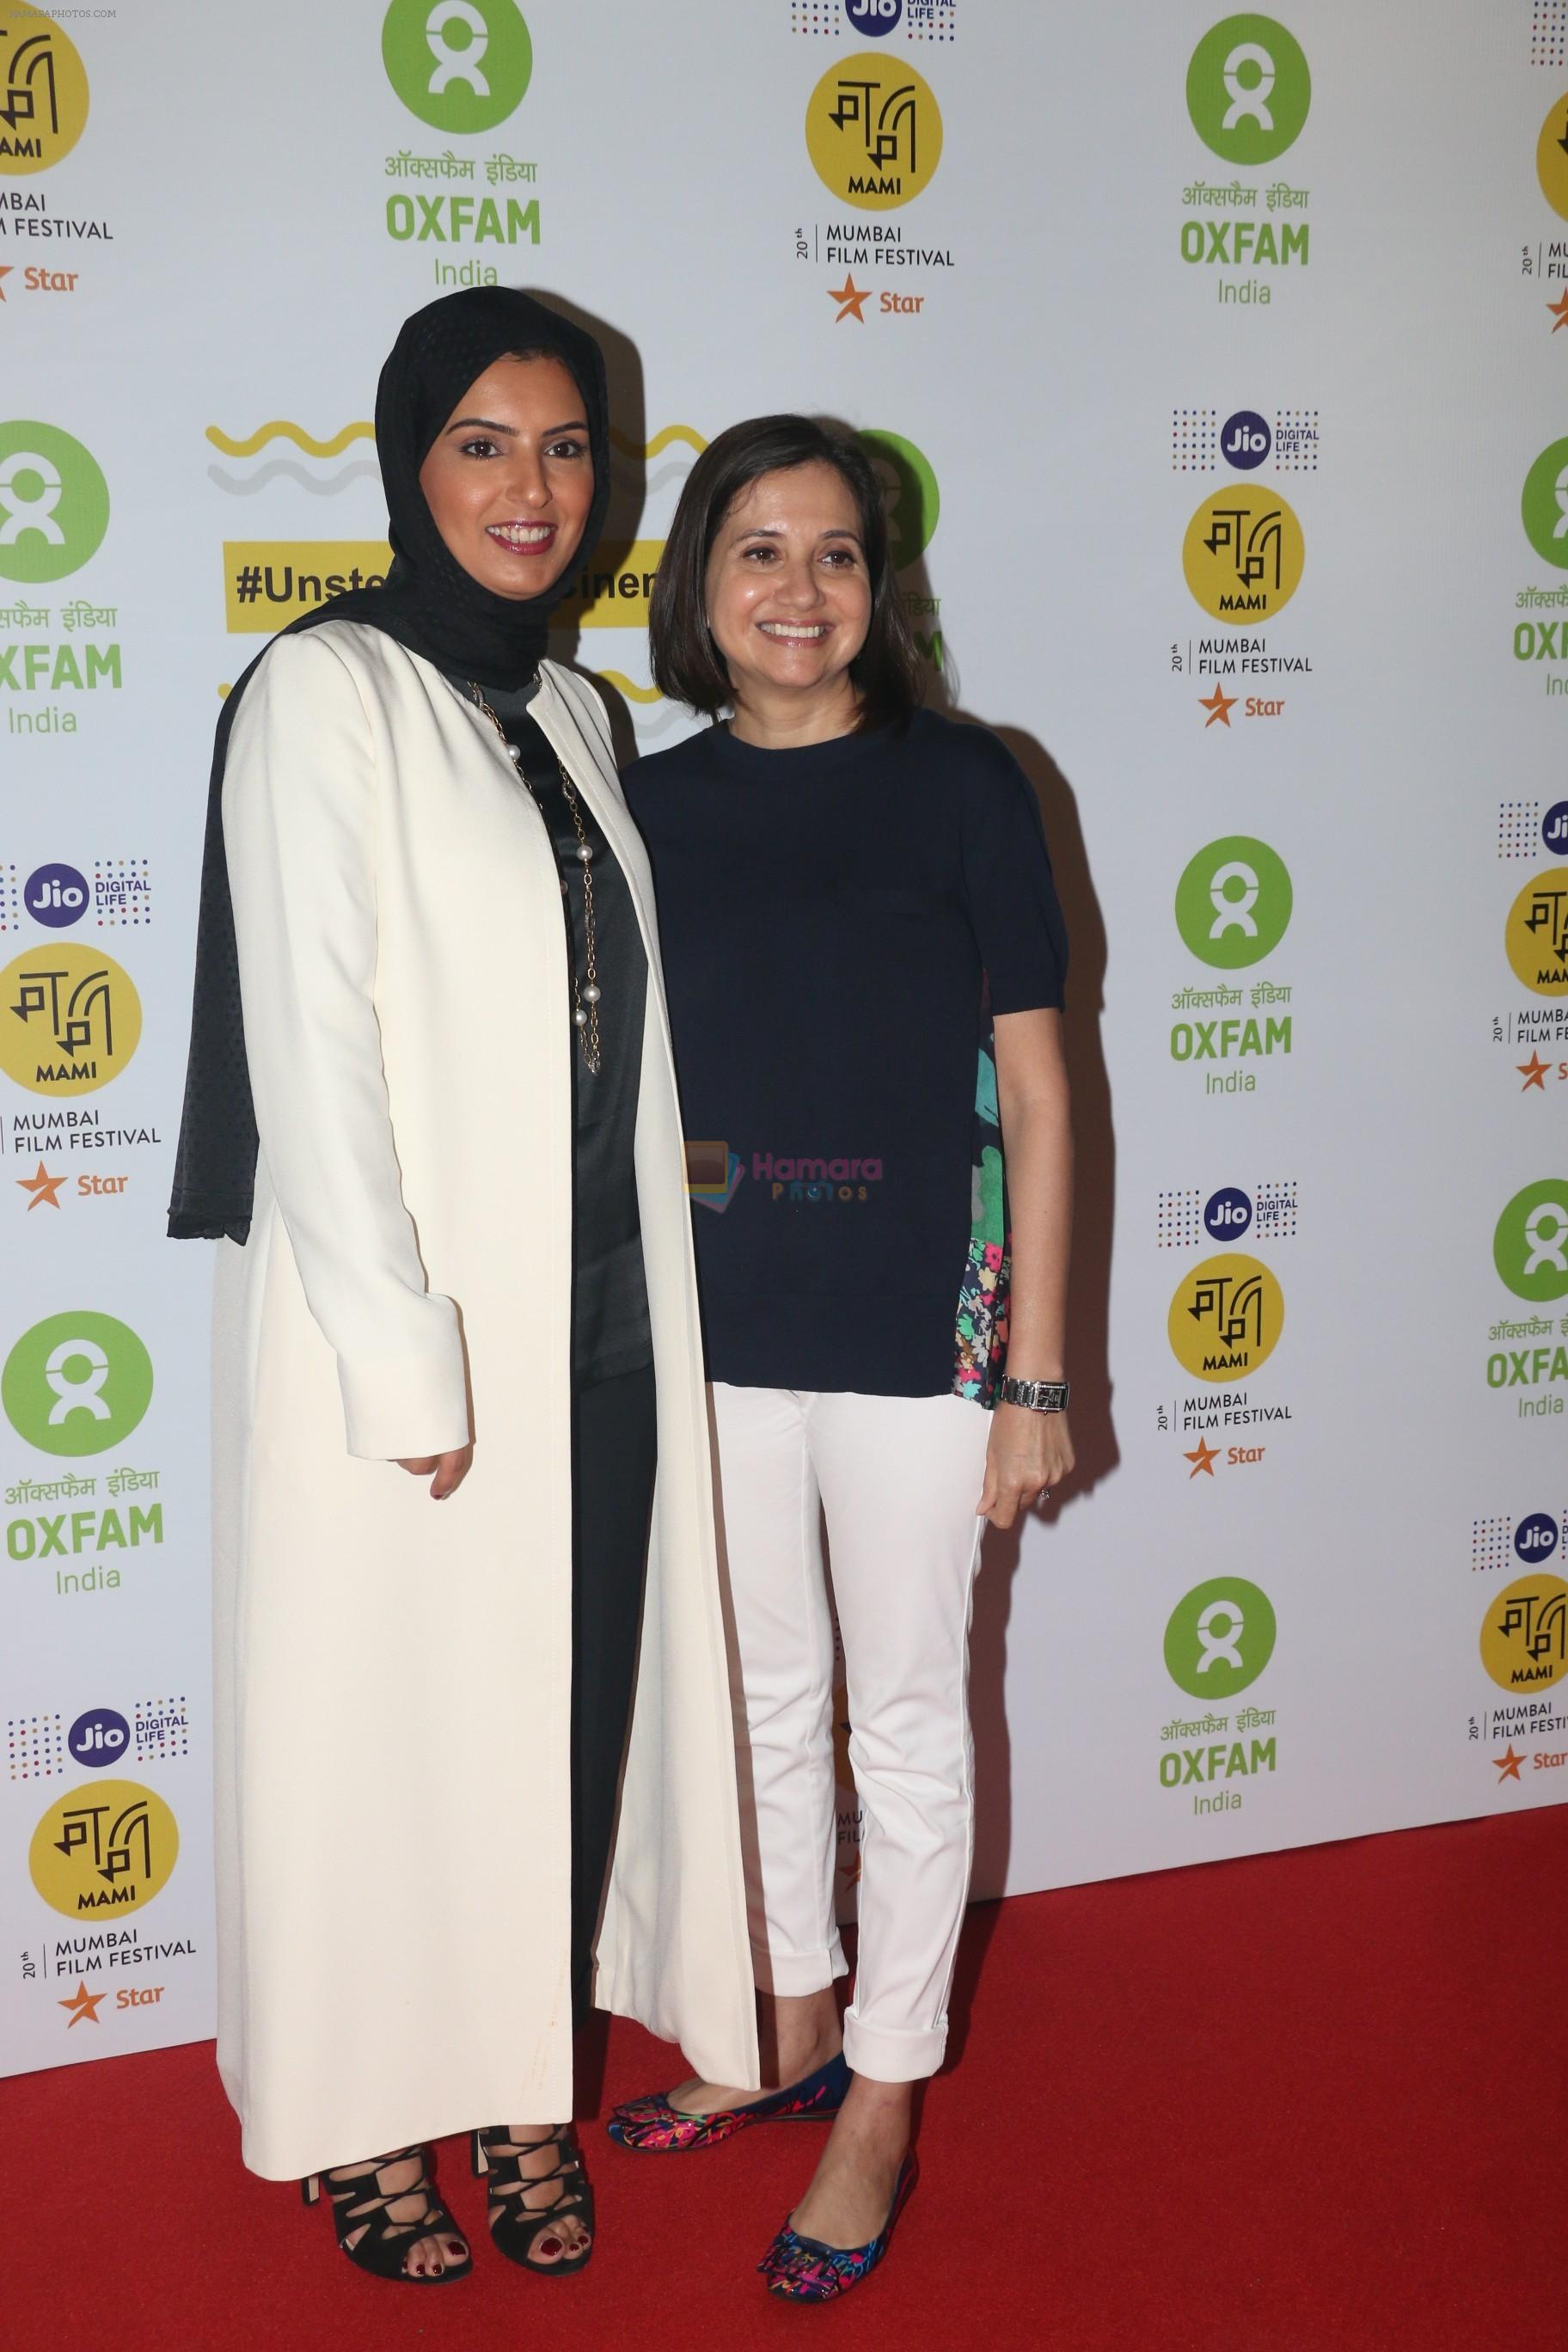 Anupama Chopra at the Red Carpet For Oxfam Mami Women In Film Brunch on 28th Oct 2018